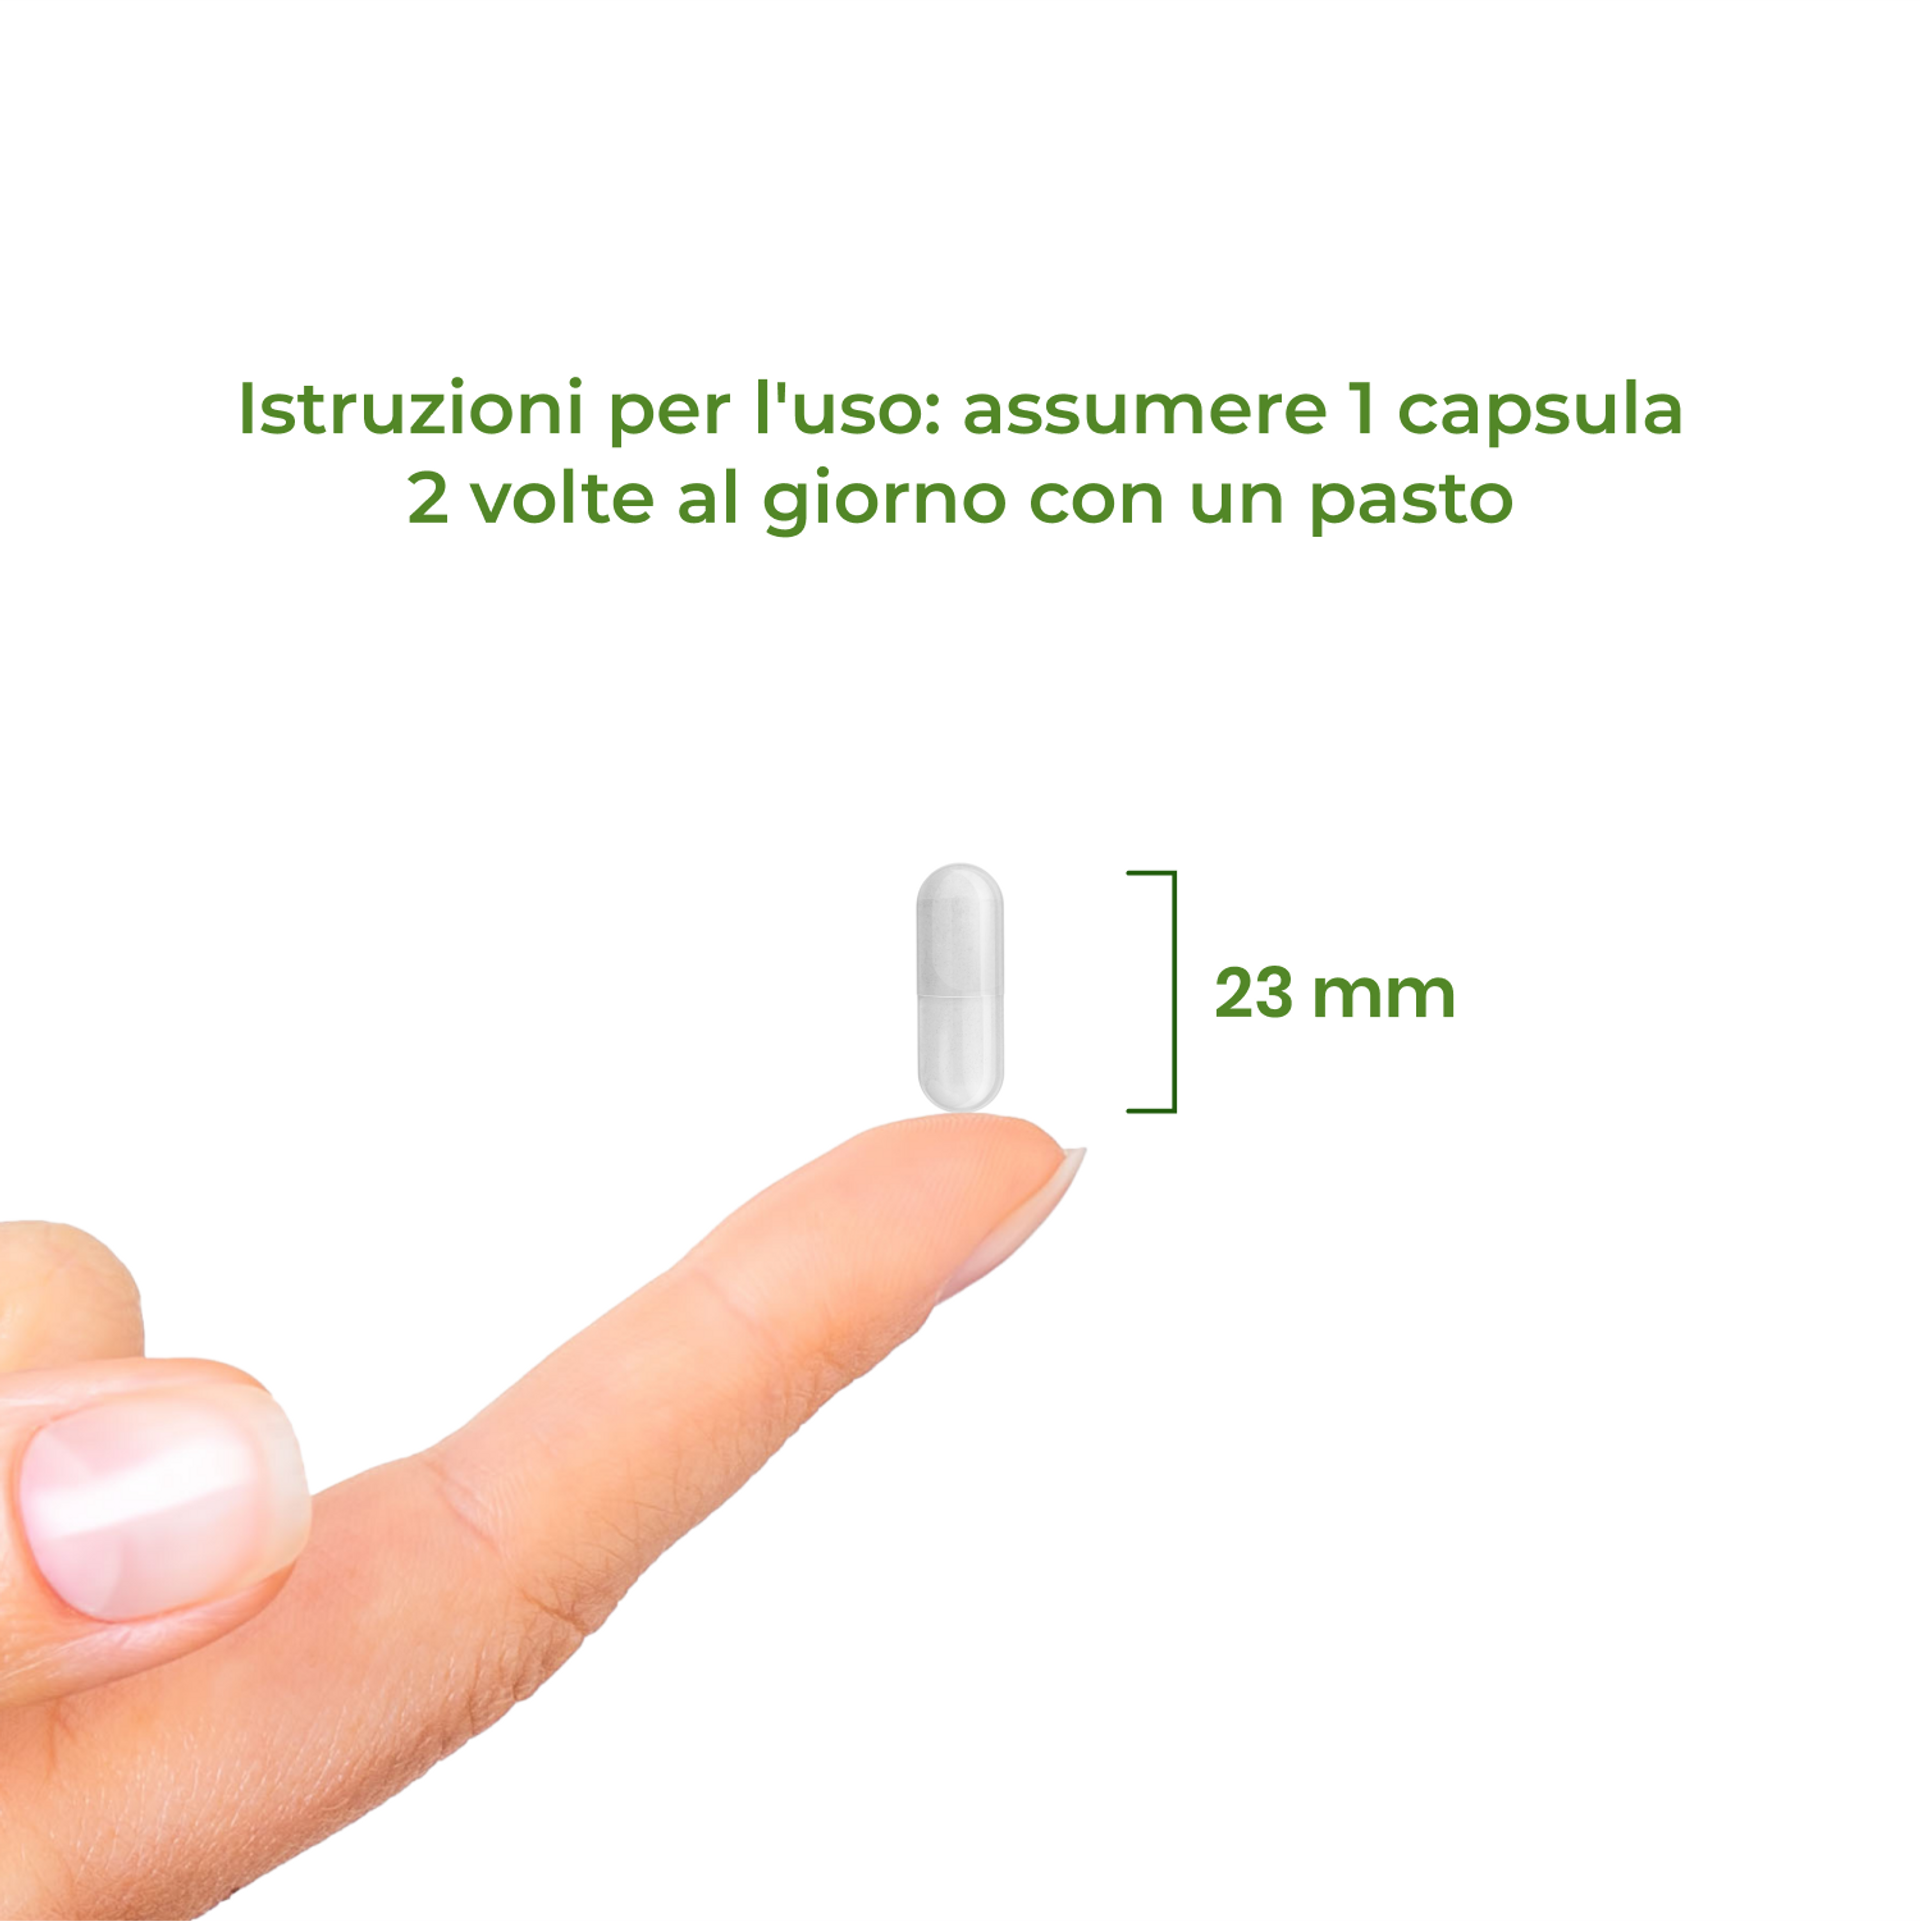 6_IT_Dosage_Magnesium Synergy_6813-04.png